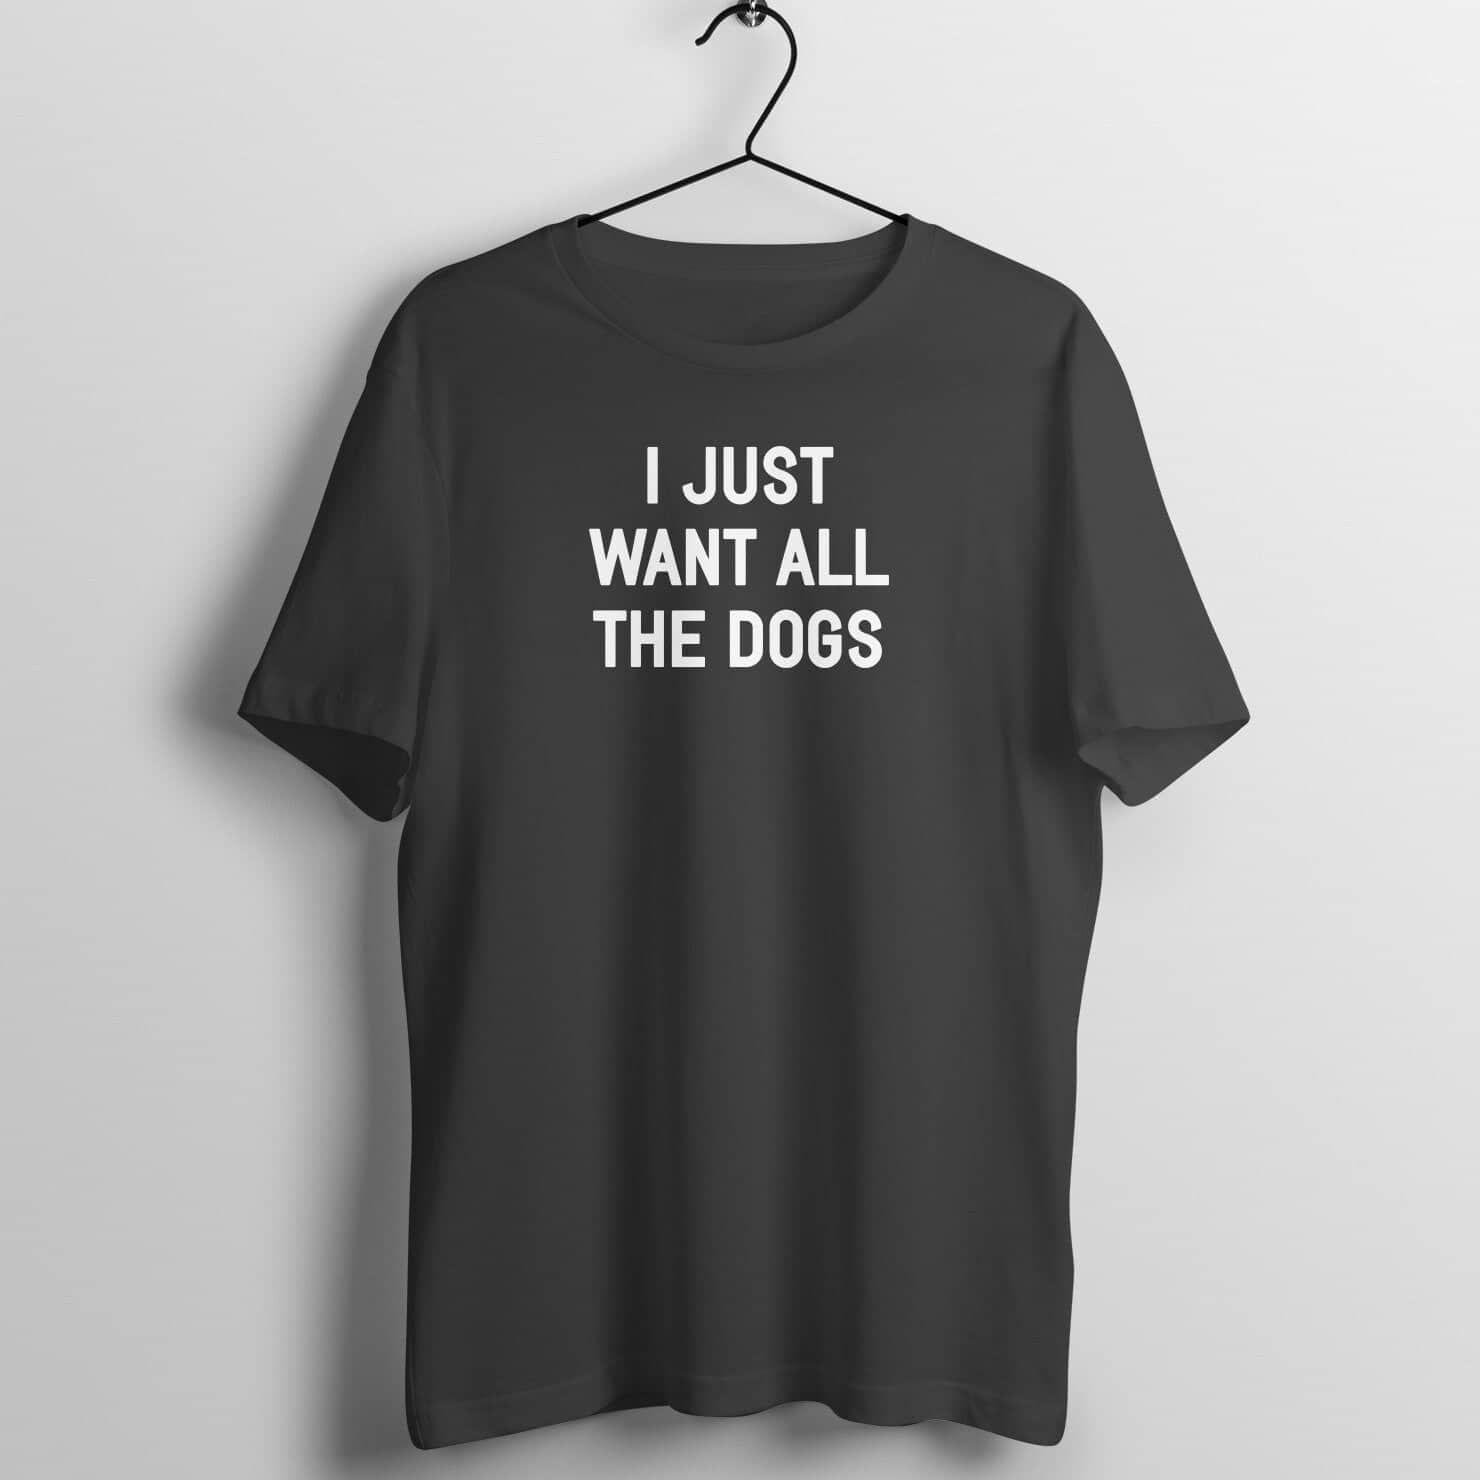 I Just Want All Dogs Exclusive Black T Shirt for Men and Women Printrove Black S 